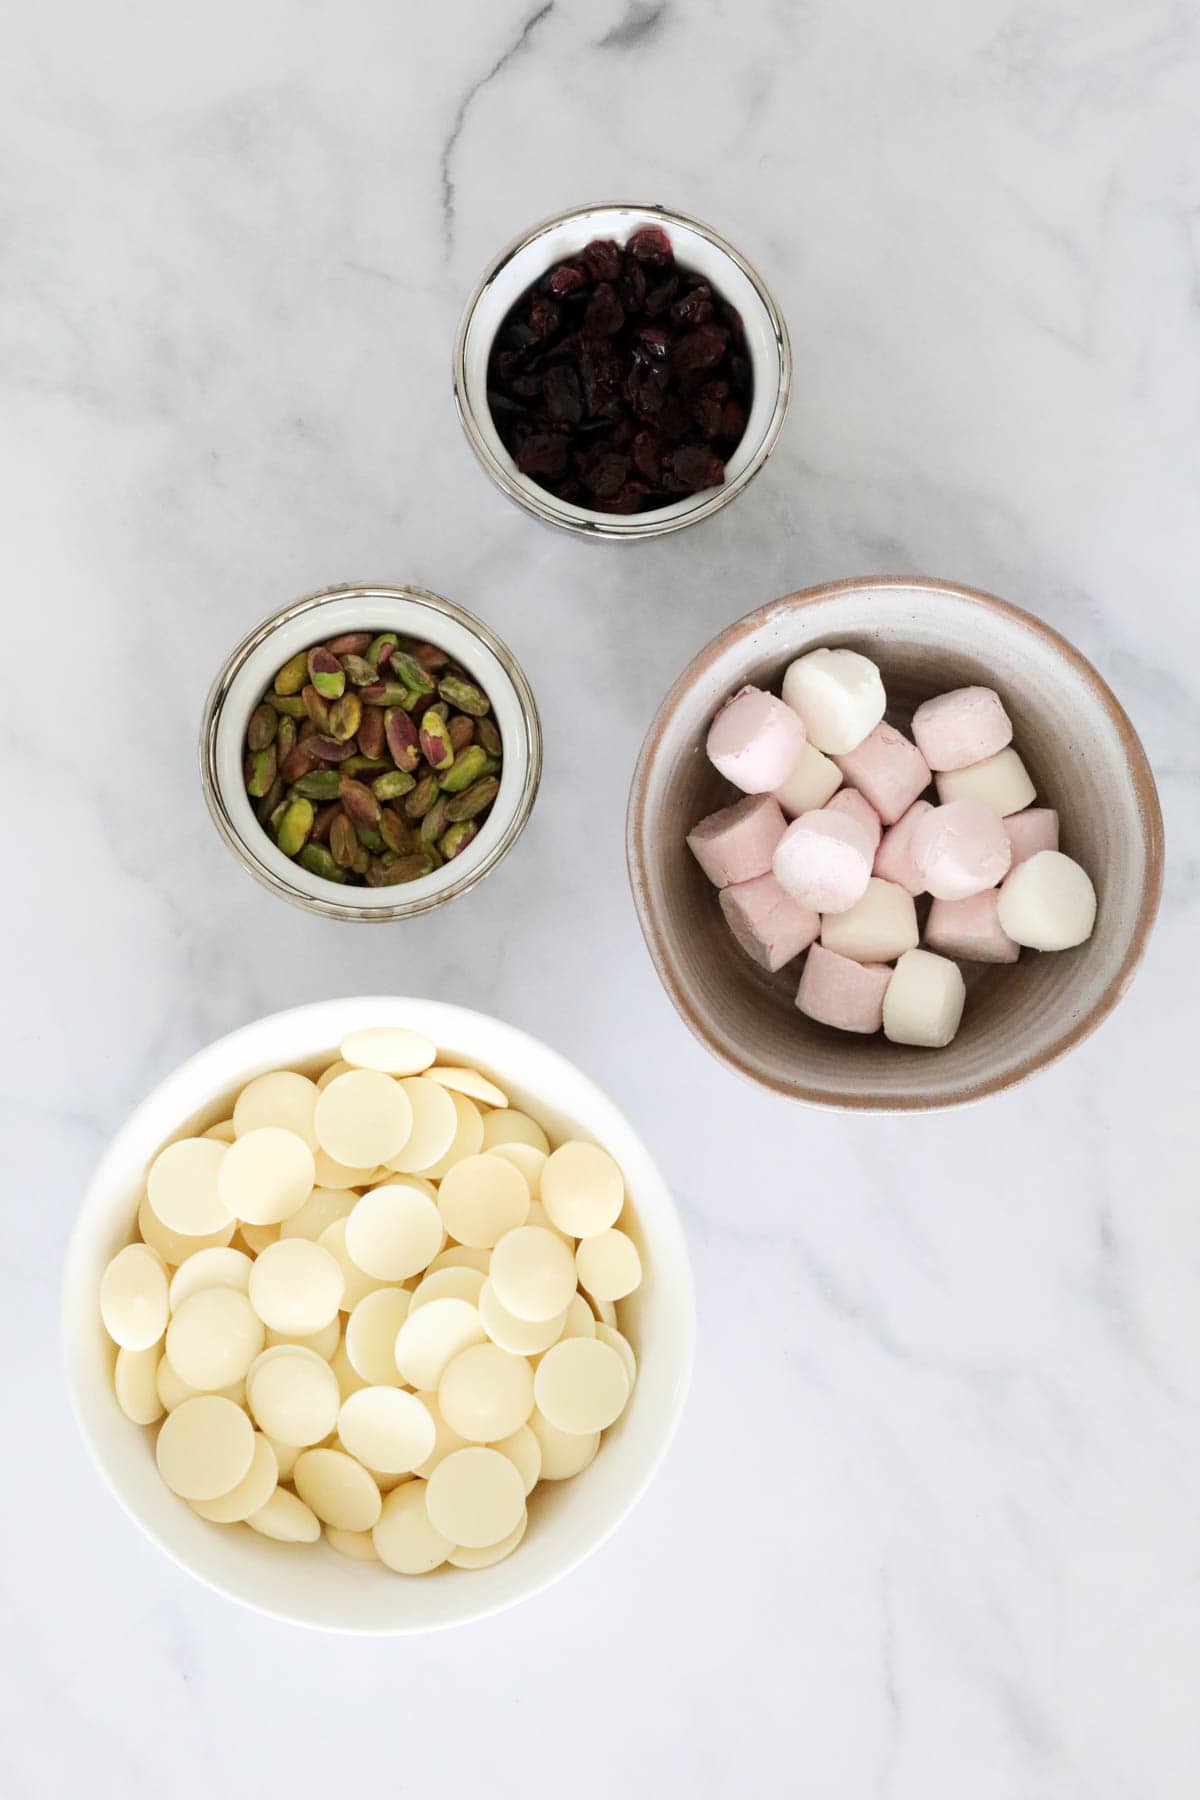 The ingredients for white chocolate rocky road.